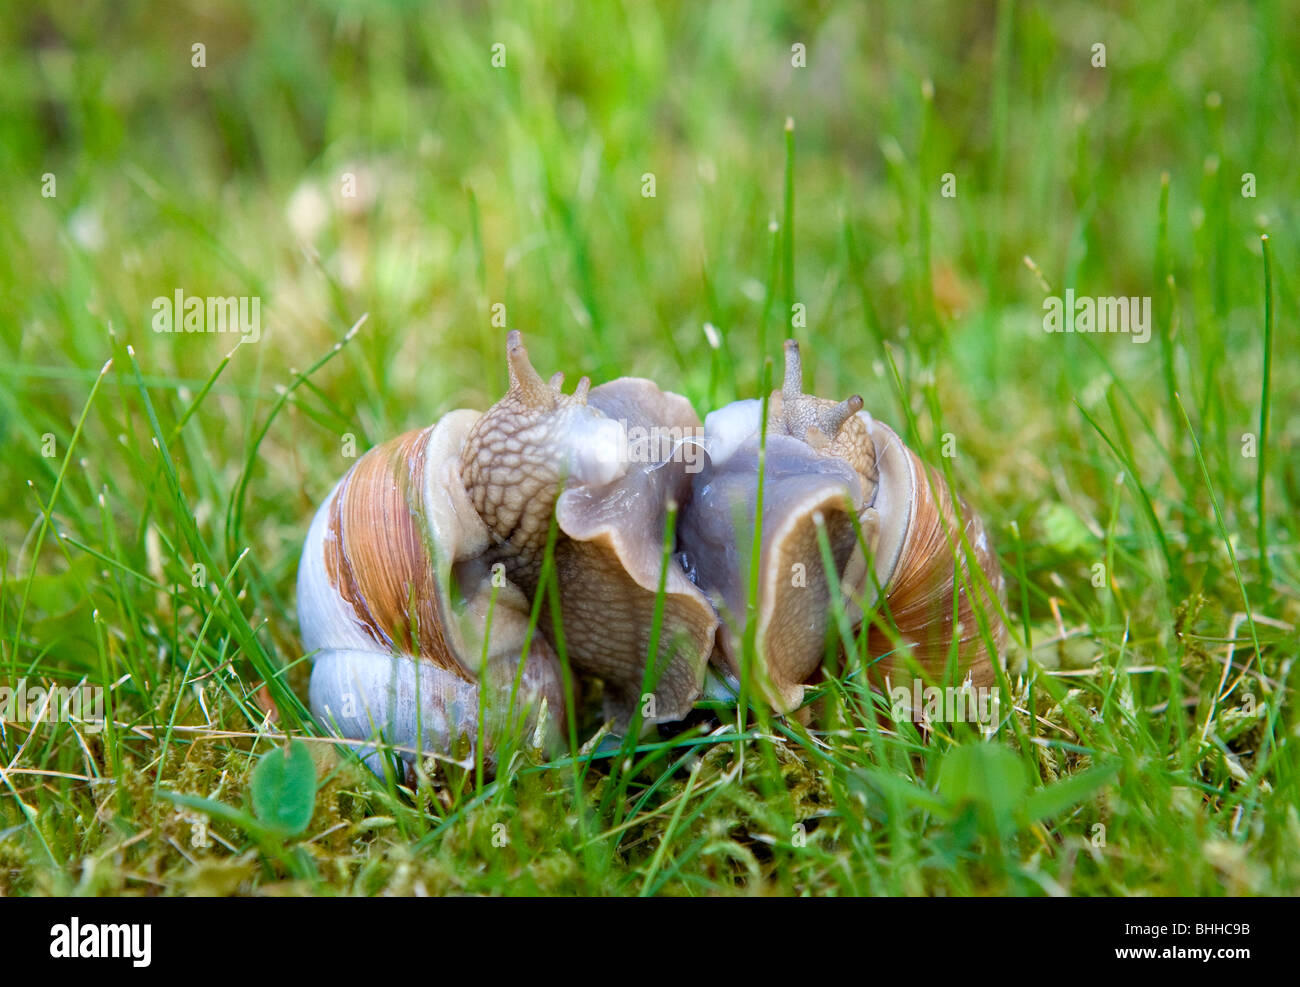 Two snails mating, close-up, Sweden. Stock Photo